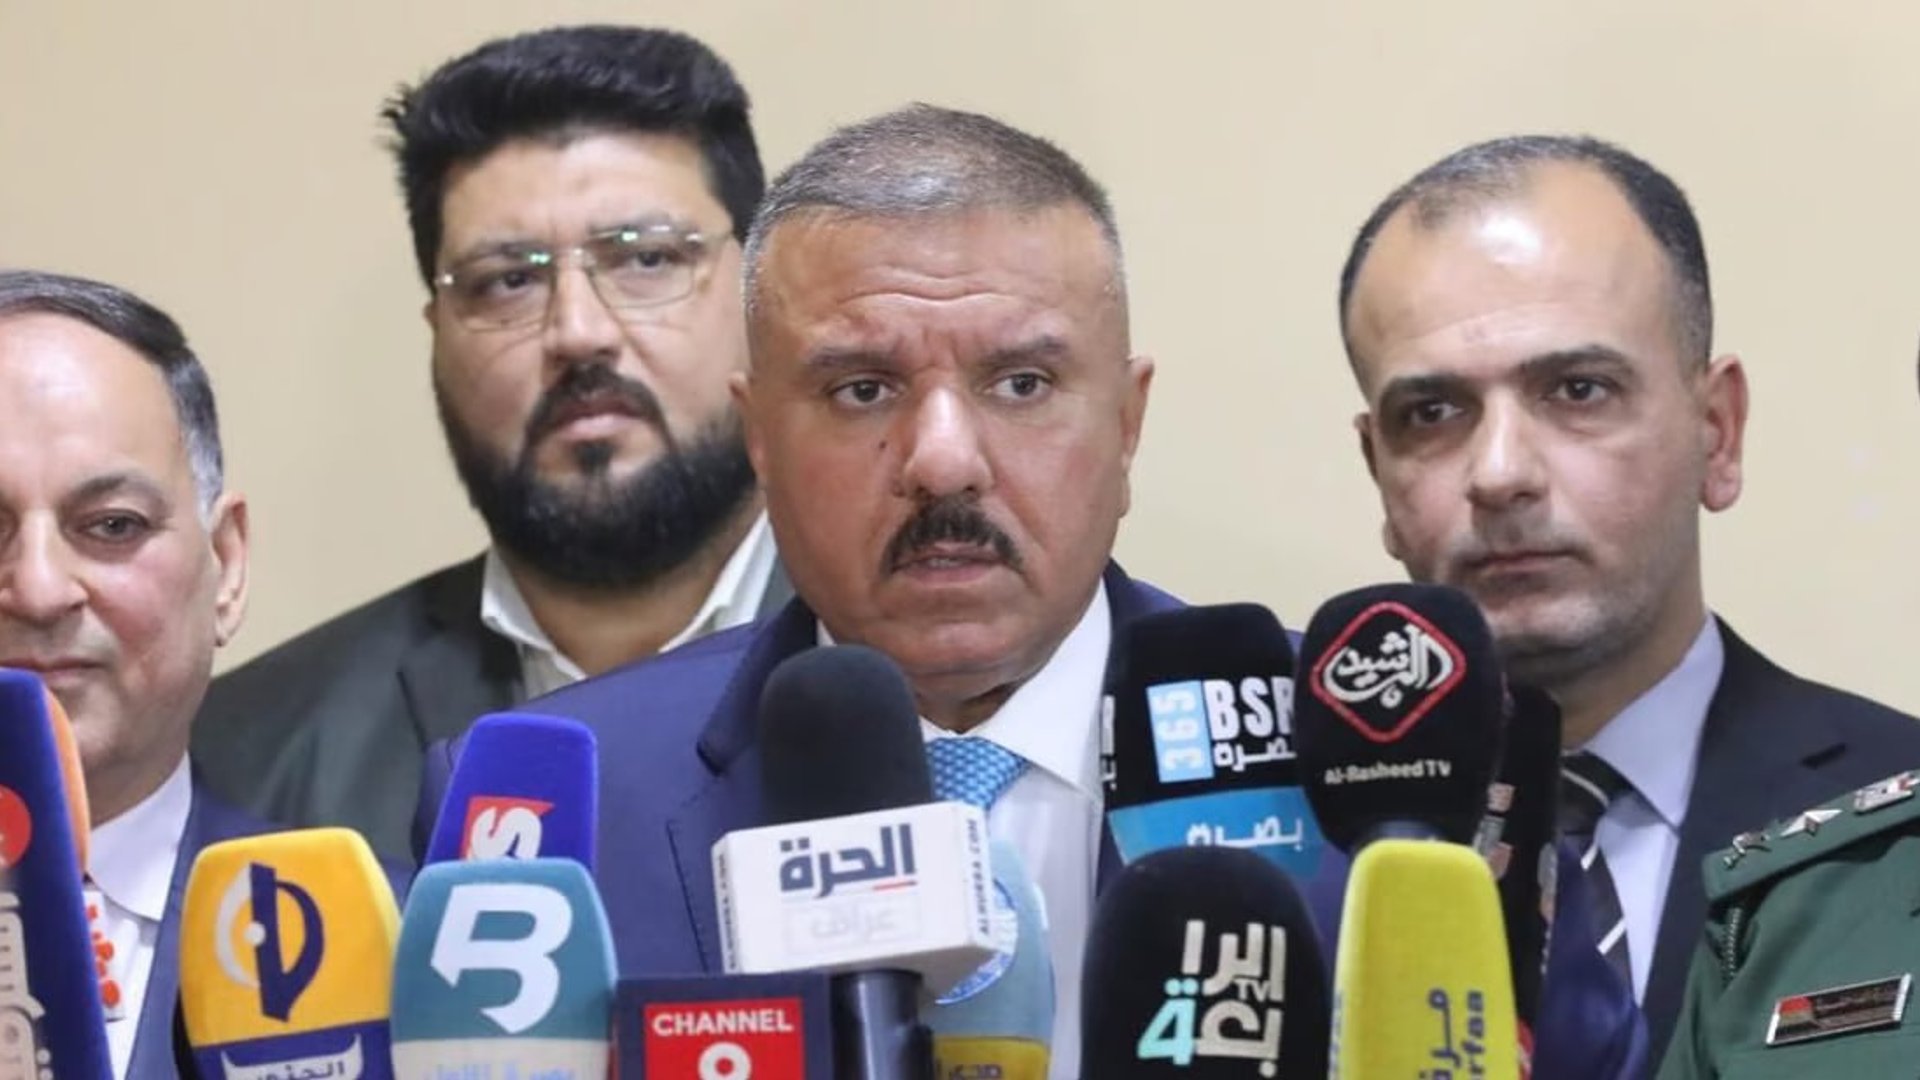 Iraqi interior minister announces weapons buyback program in Basra